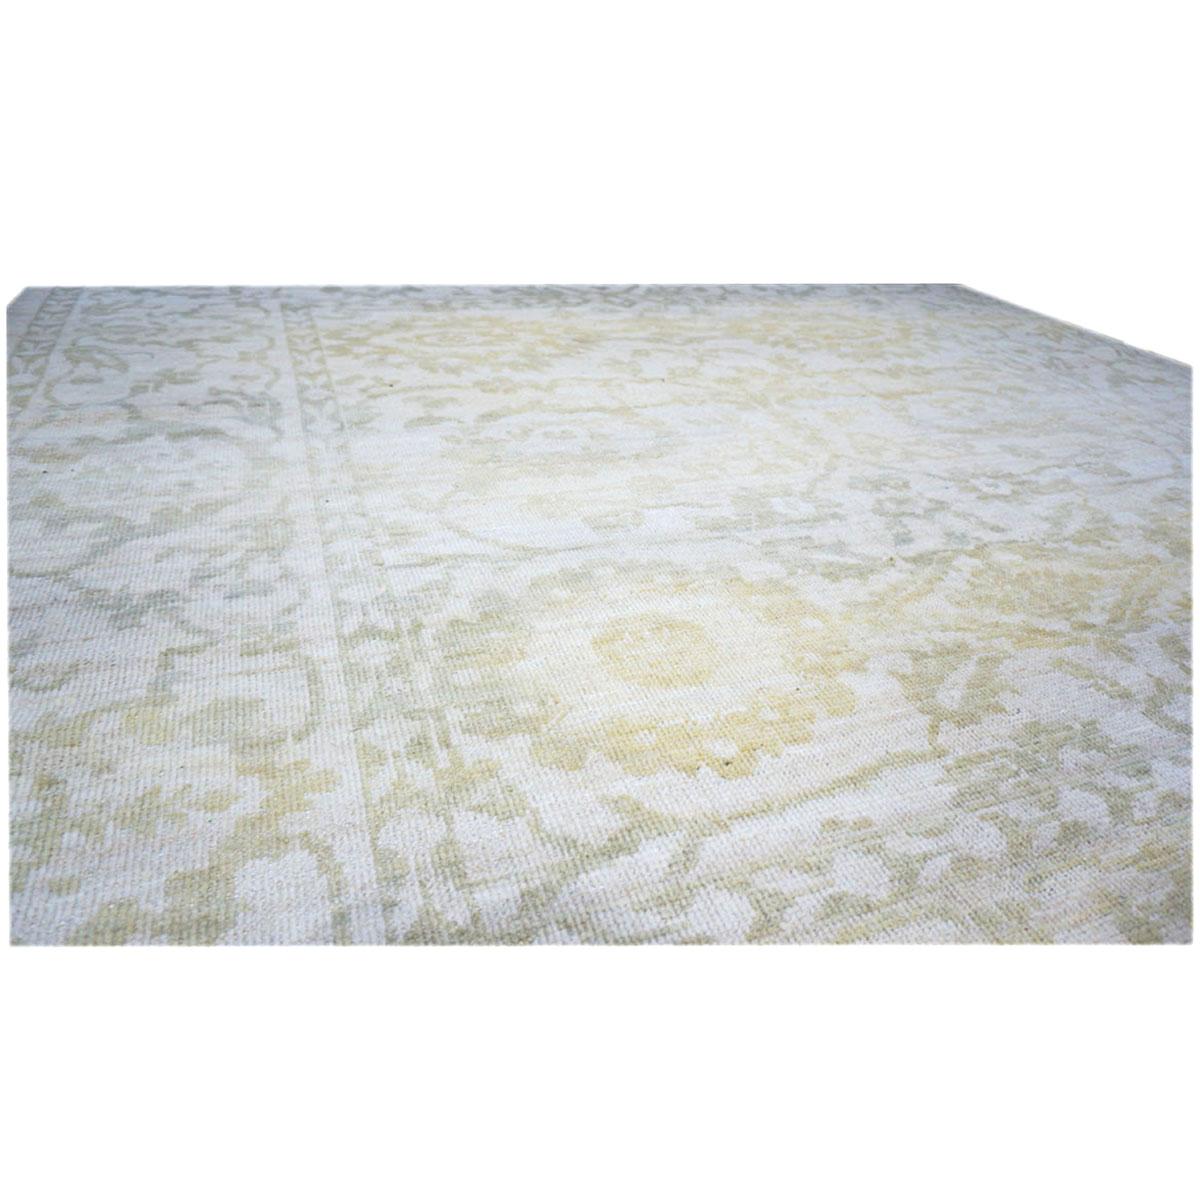 Contemporary 21st Century Persian Sultanabad 6x6 Ivory & Green Square Handmade Area Rug For Sale